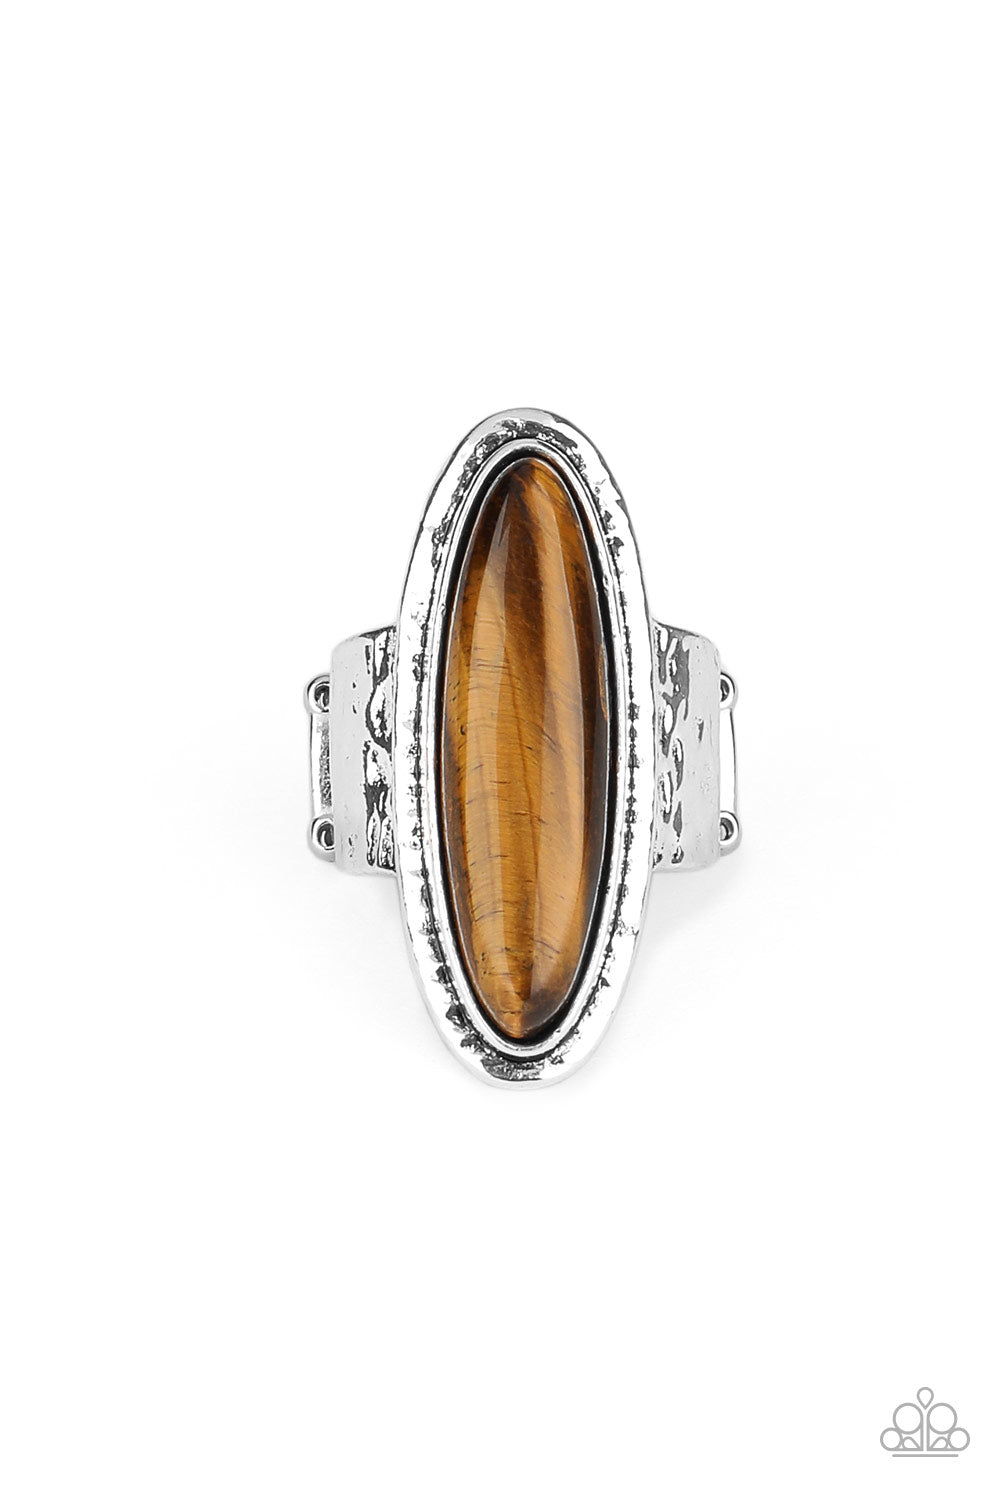 STONE MYSTIC - BROWN OVAL TIGER EYE NATURAL STONE SILVER RING